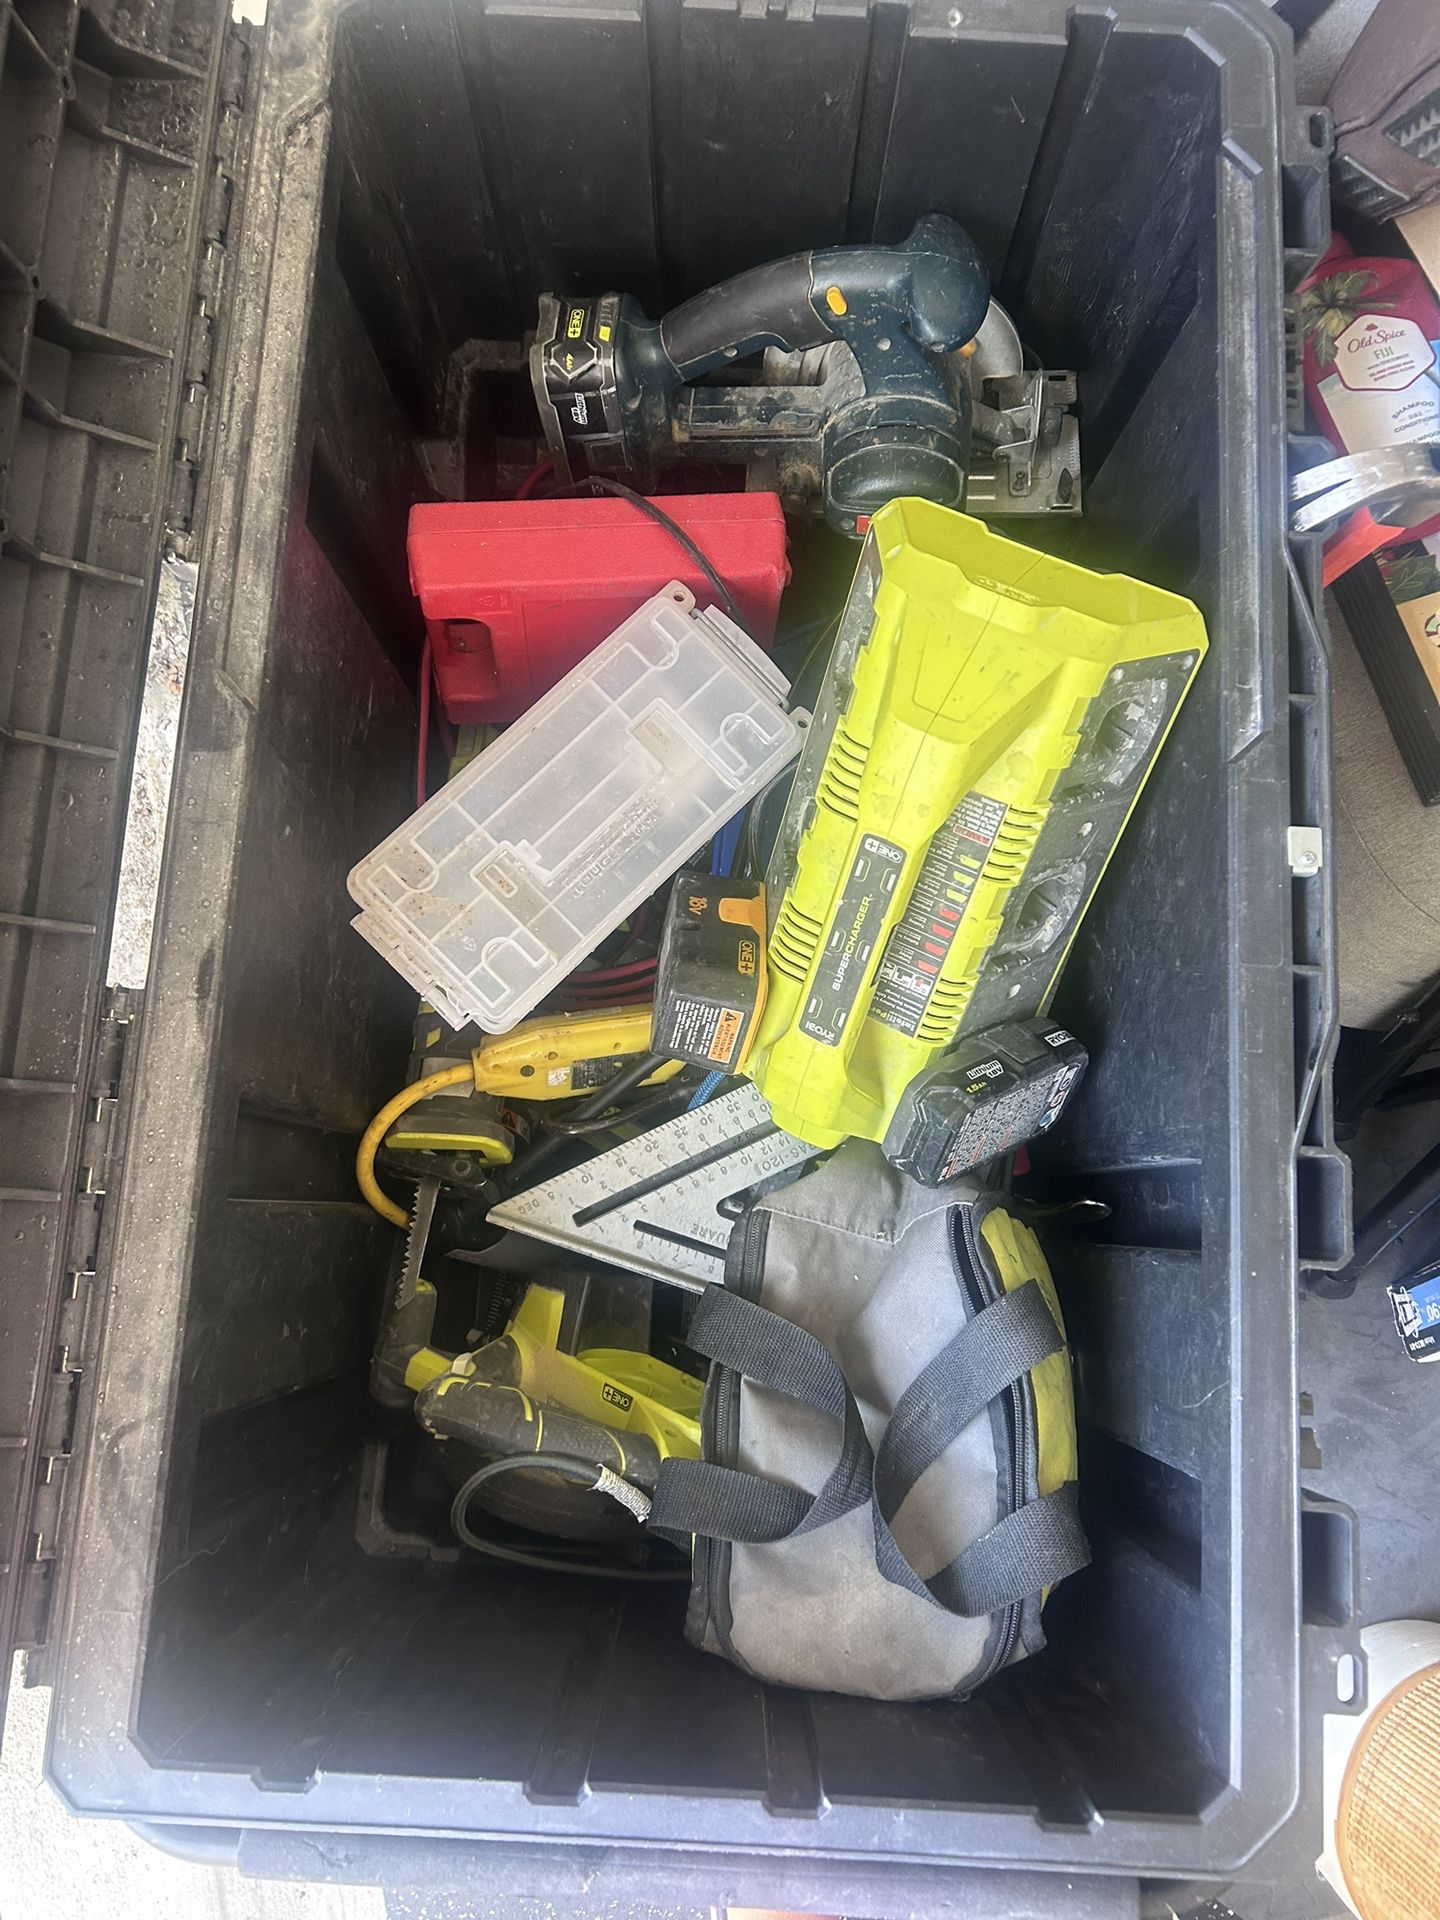 Power Drill And Power Saws + Assorted Power Tools